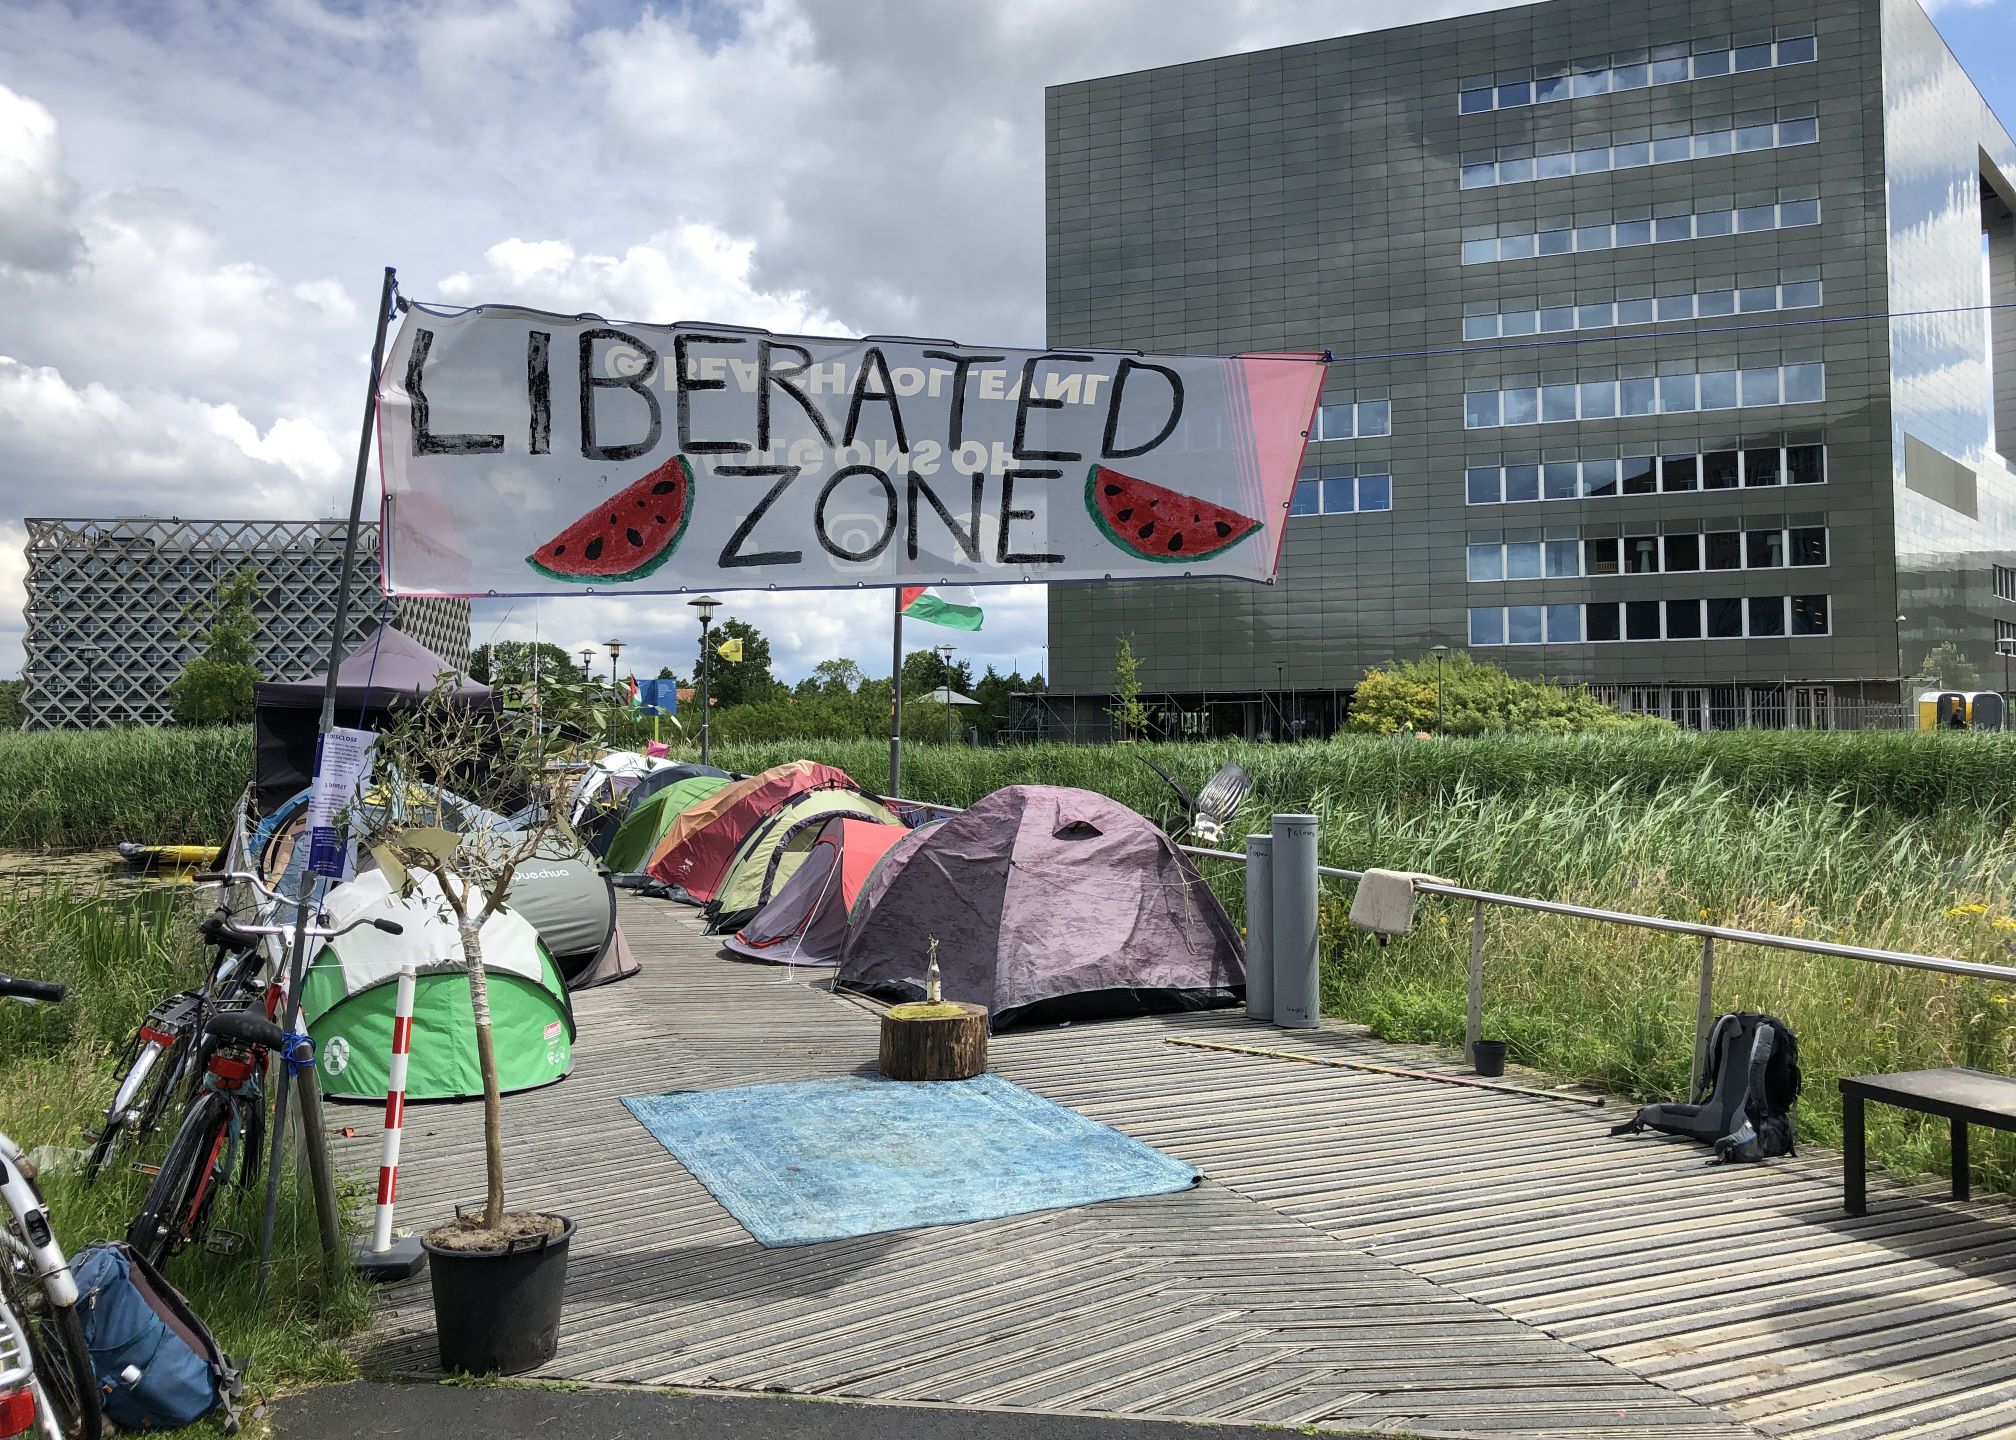 Protest update: blockade lifted